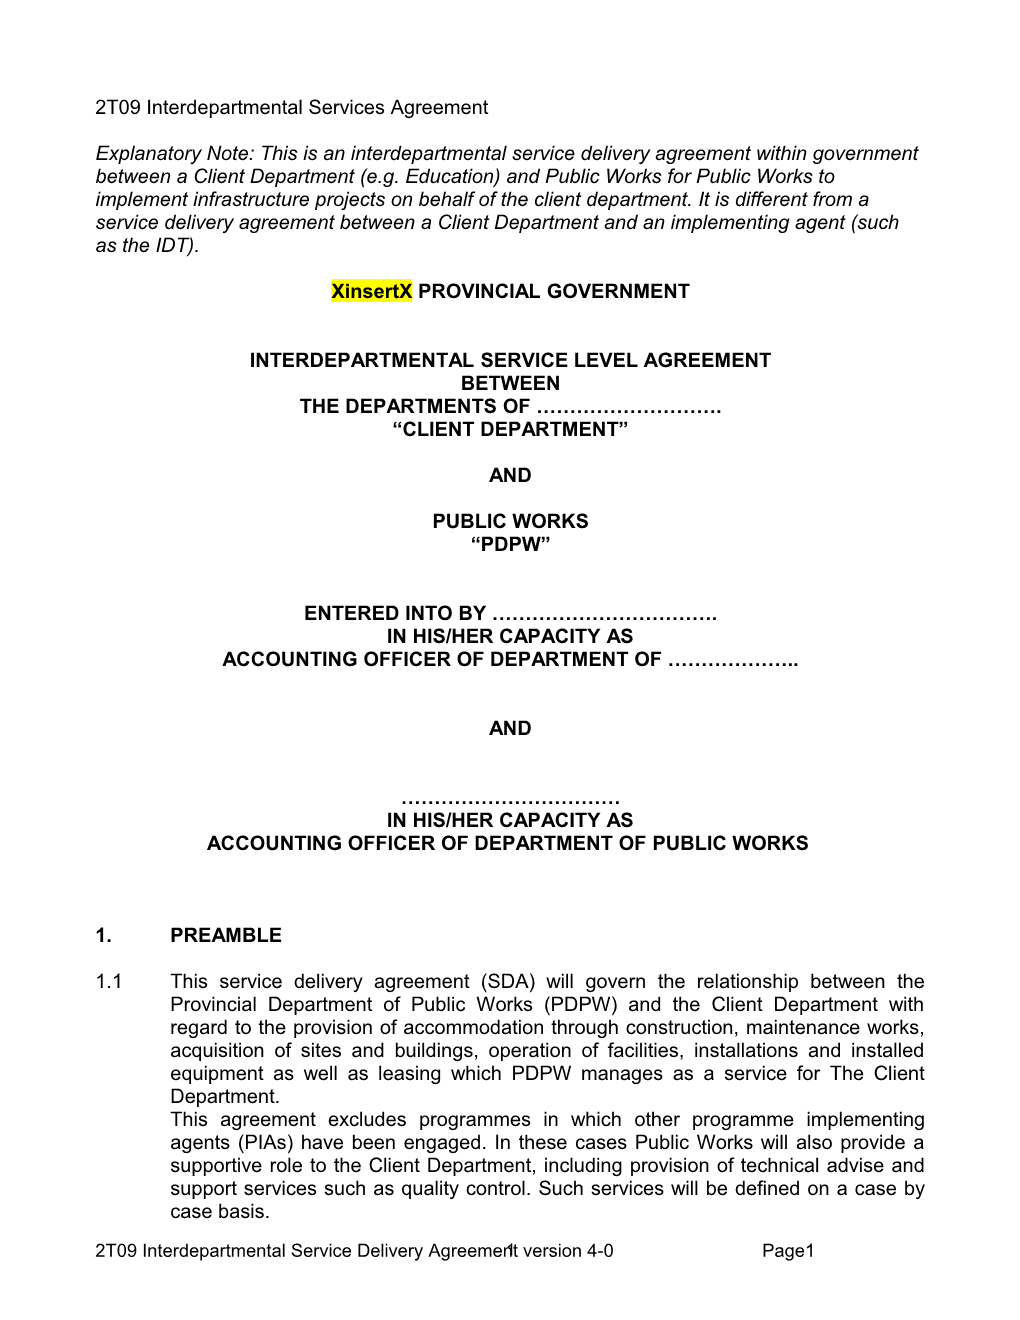 DP1-T08 - Interdepartmental Service Delivery Agreement (SDA) Client Department and Public